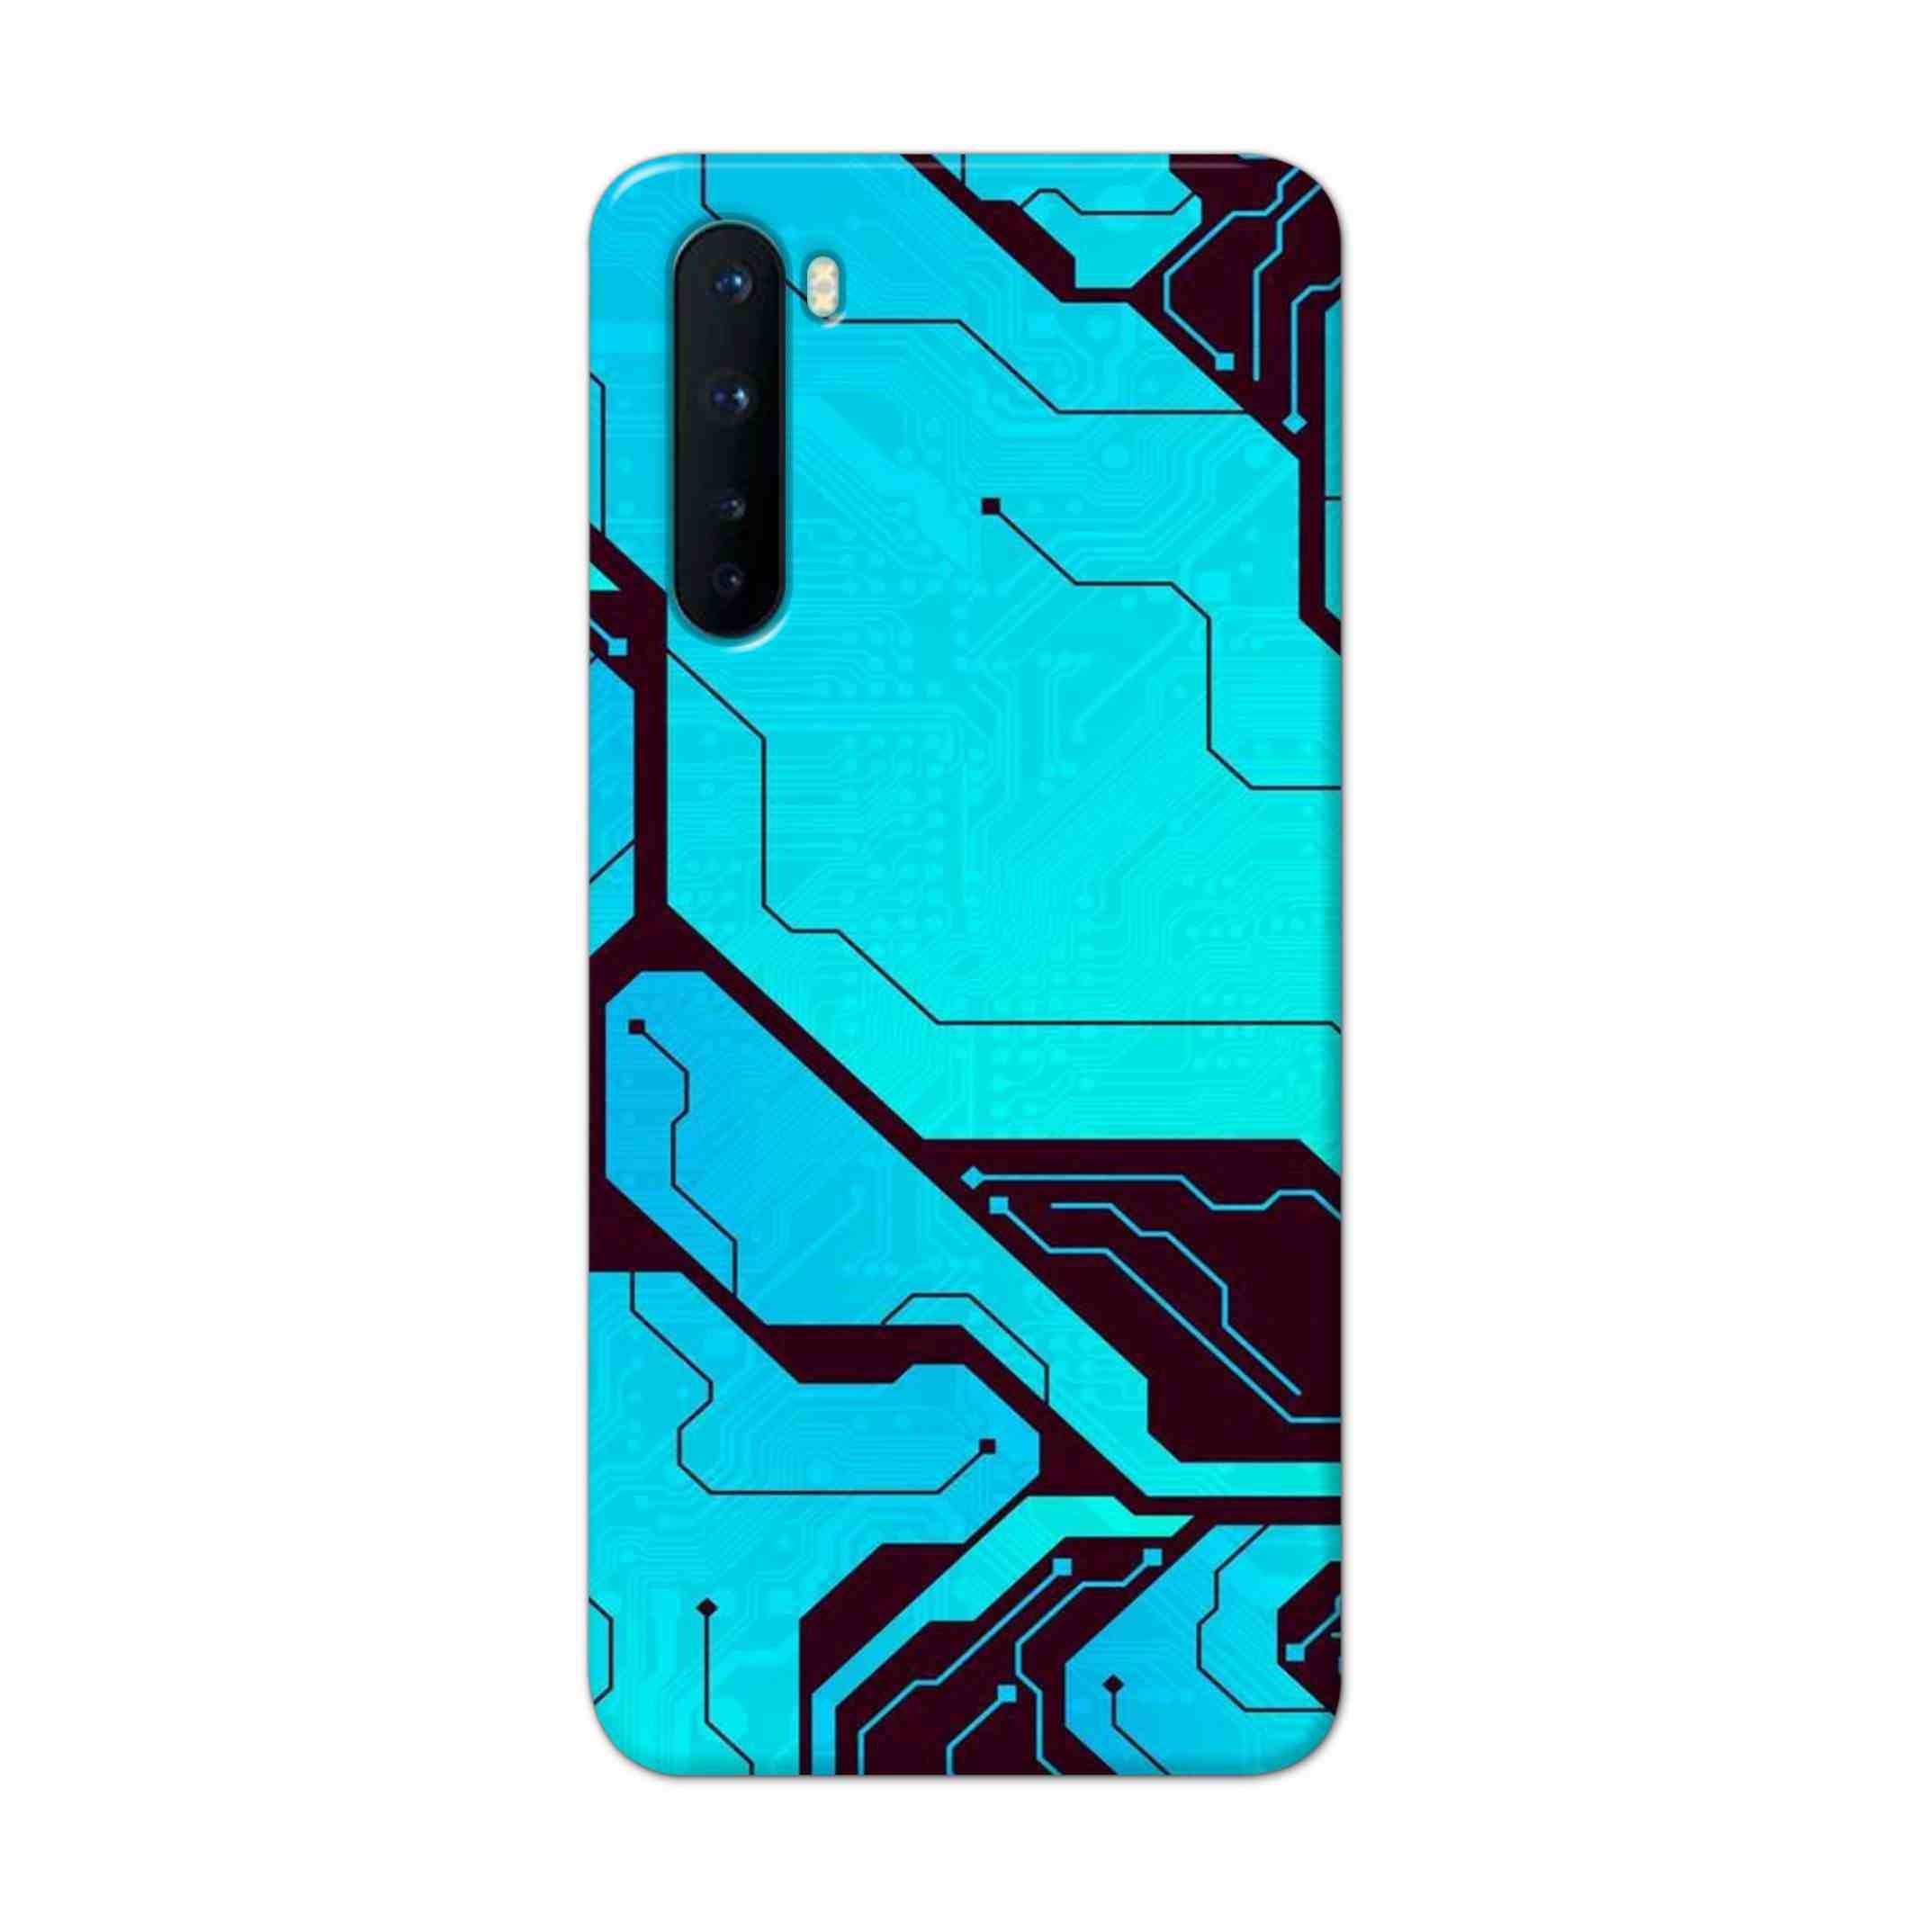 Buy Futuristic Line Hard Back Mobile Phone Case Cover For OnePlus Nord Online